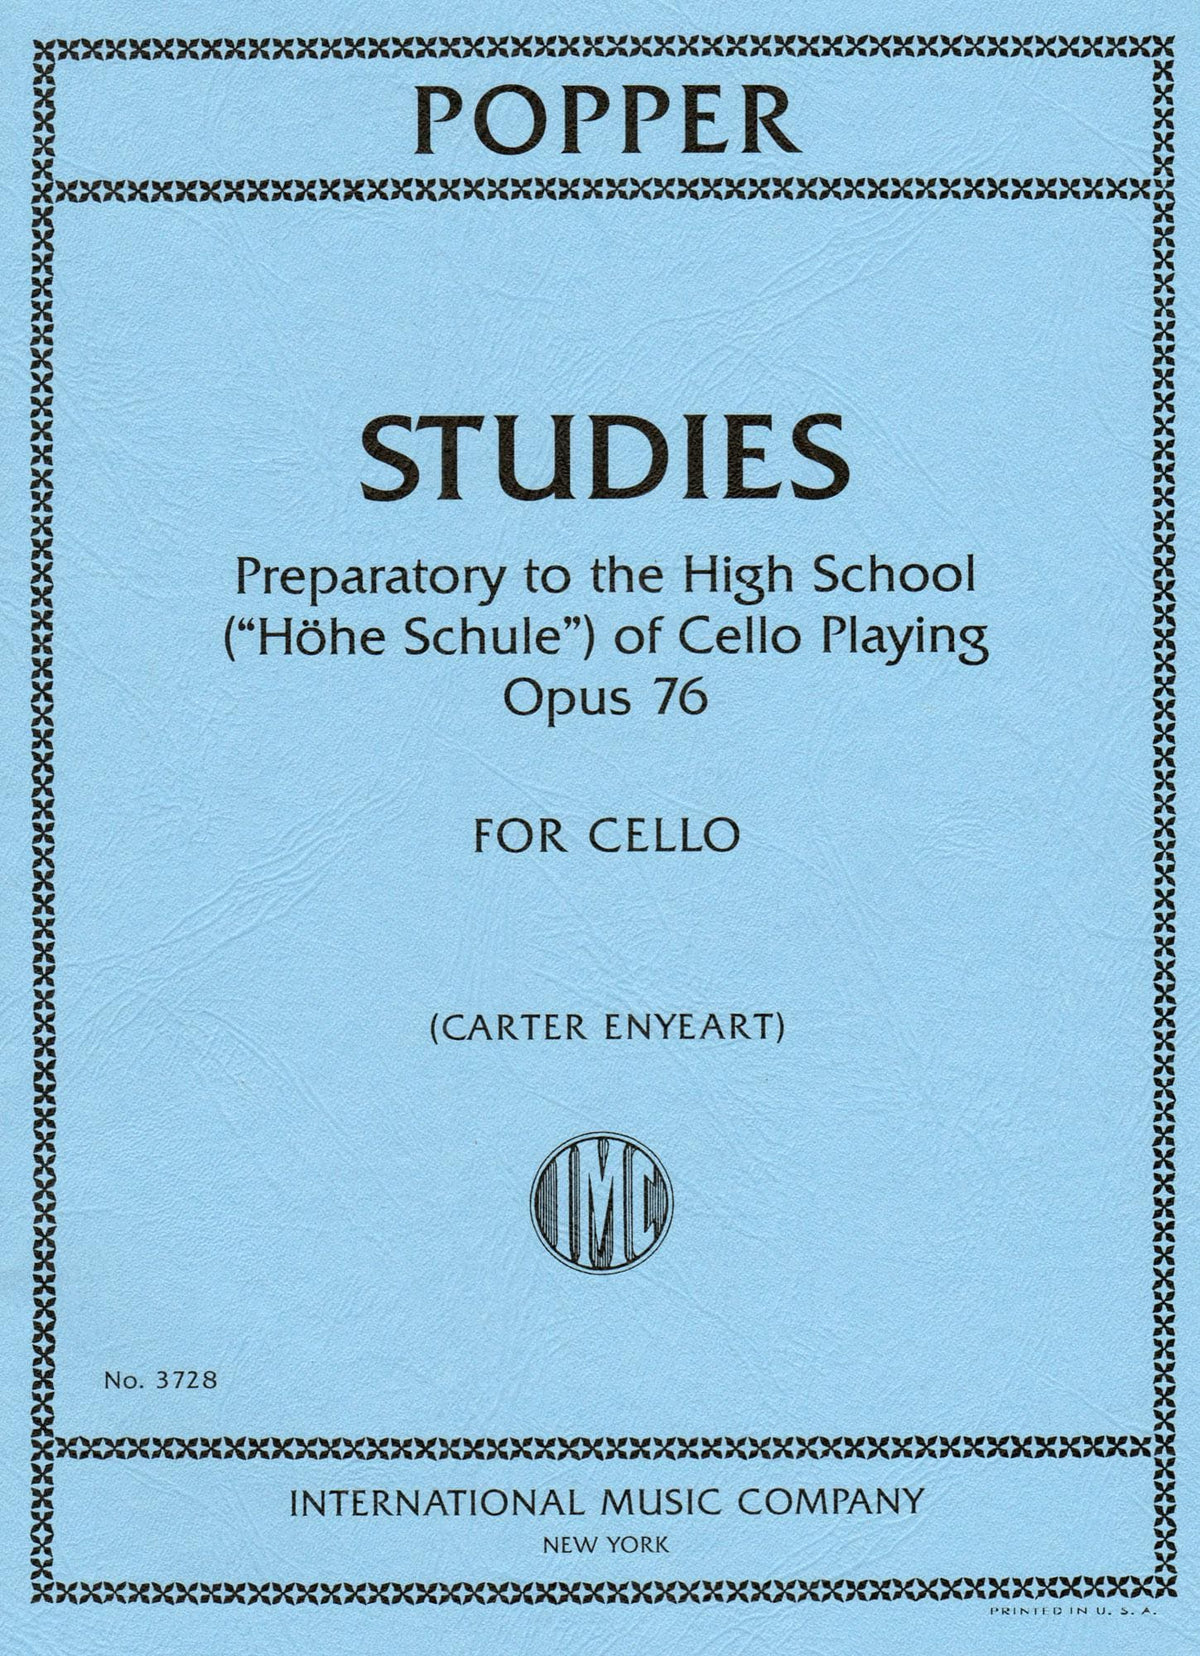 Popper, David - Studies Op 76 For Cello Published by International Music Company